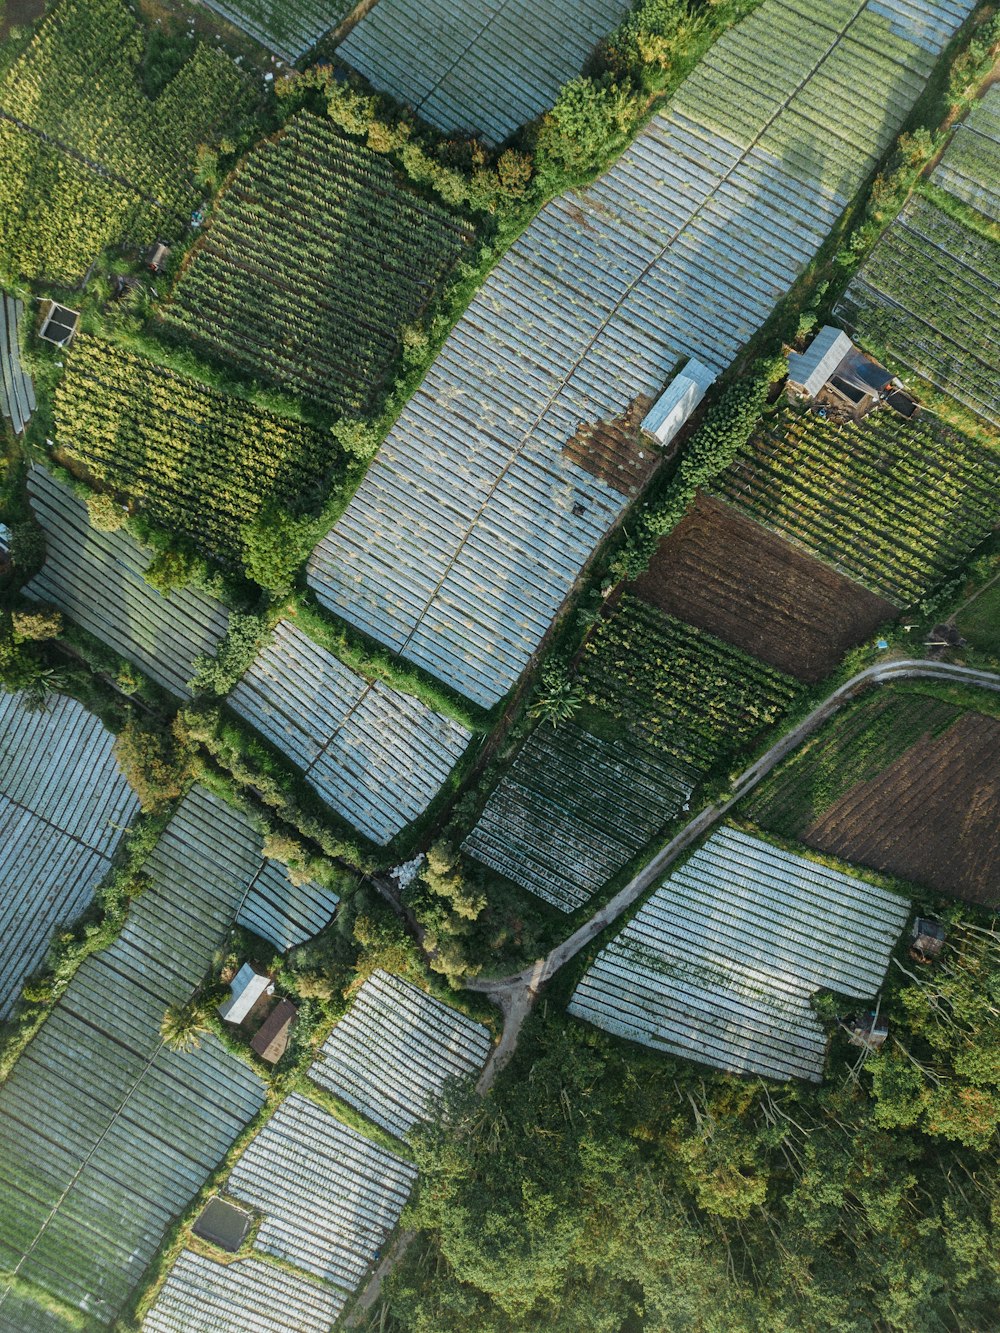 an aerial view of a farm with many rows of crops